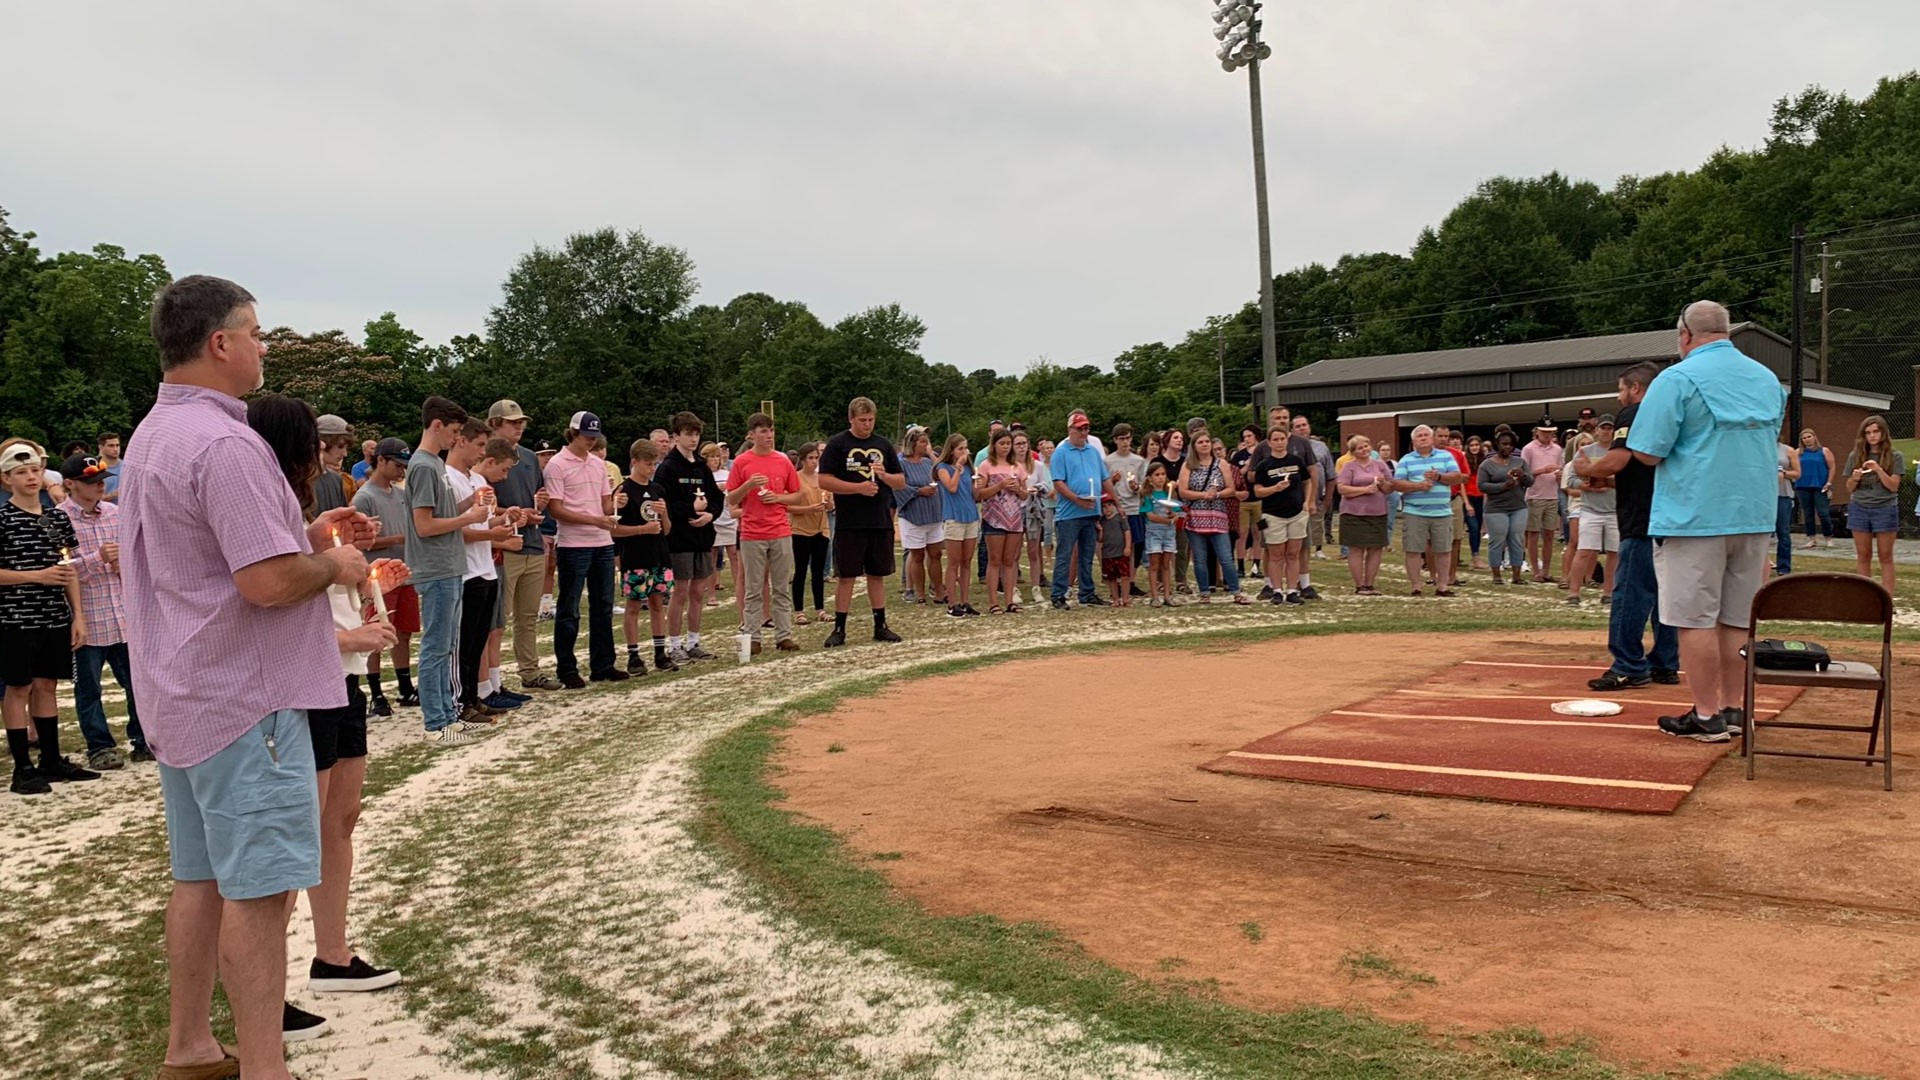 A candlelight vigil was held on the Mary Persons baseball field.